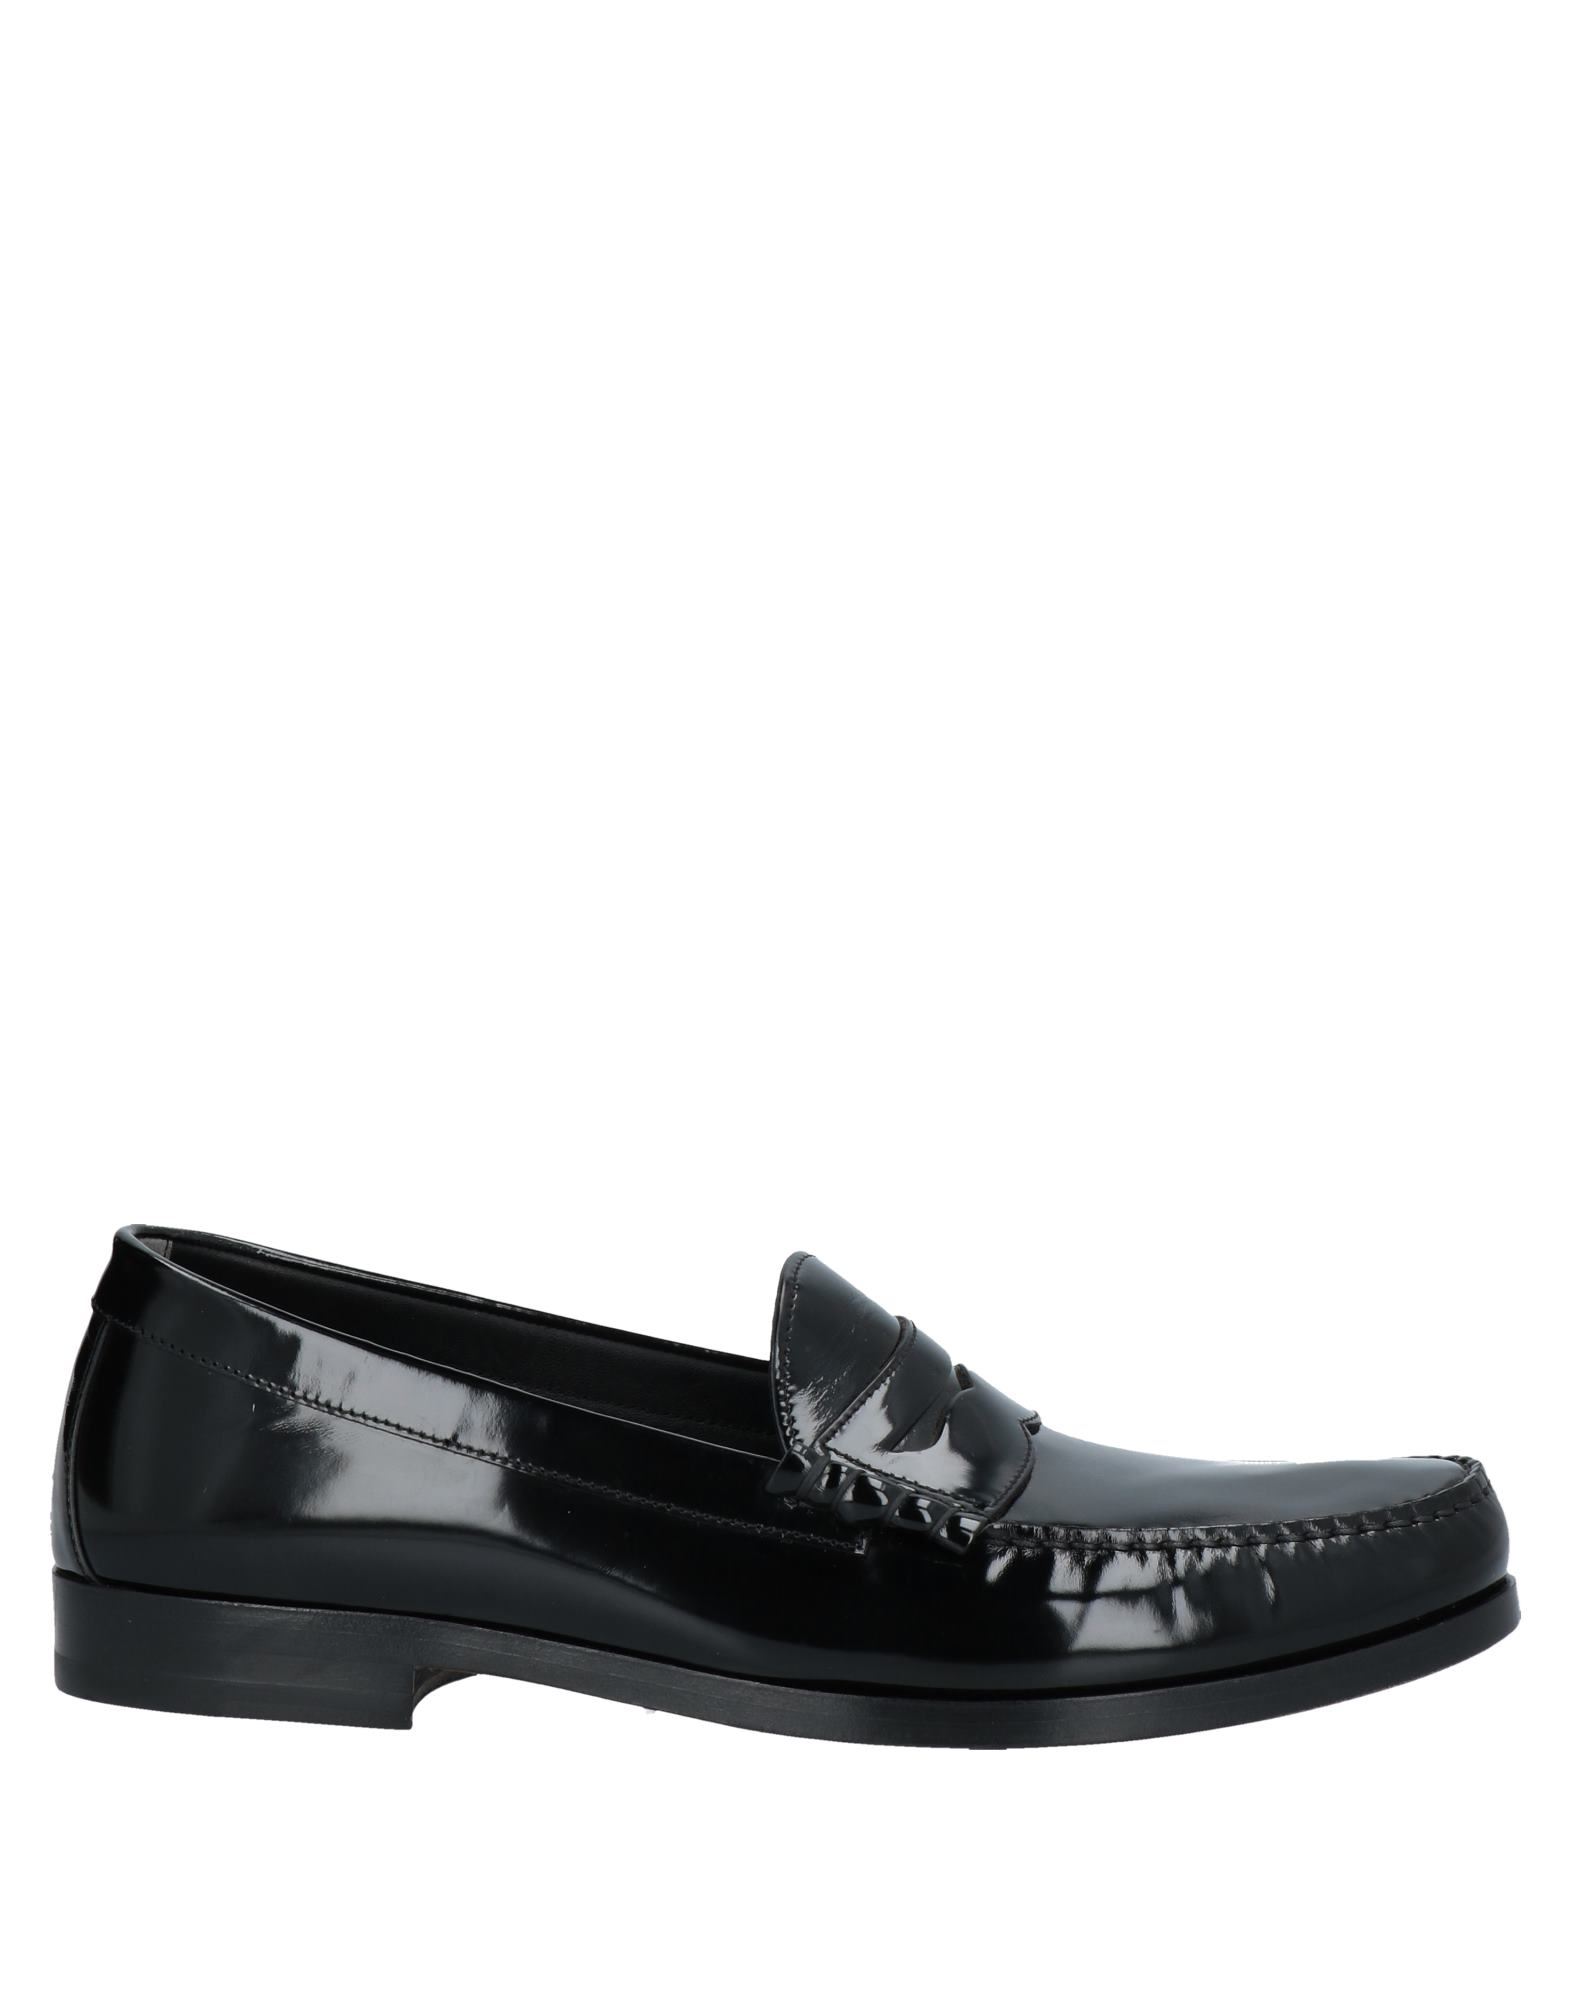 TOM FORD Loafers - Item 17112741